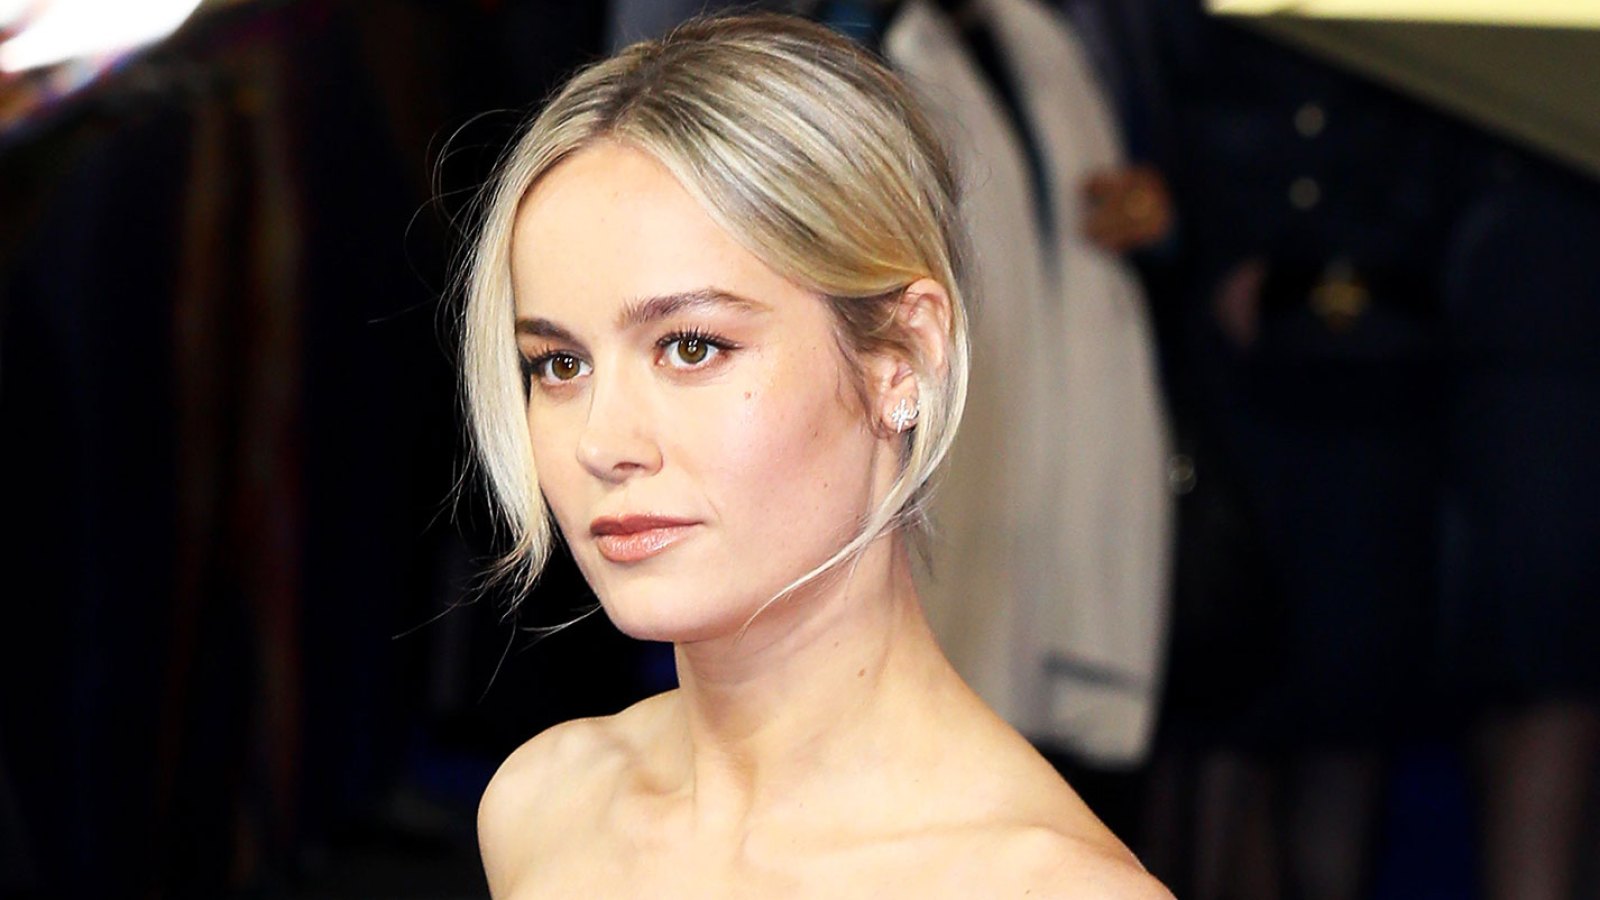 Brie Larson Shuts it Down at Her Marvel Premiere